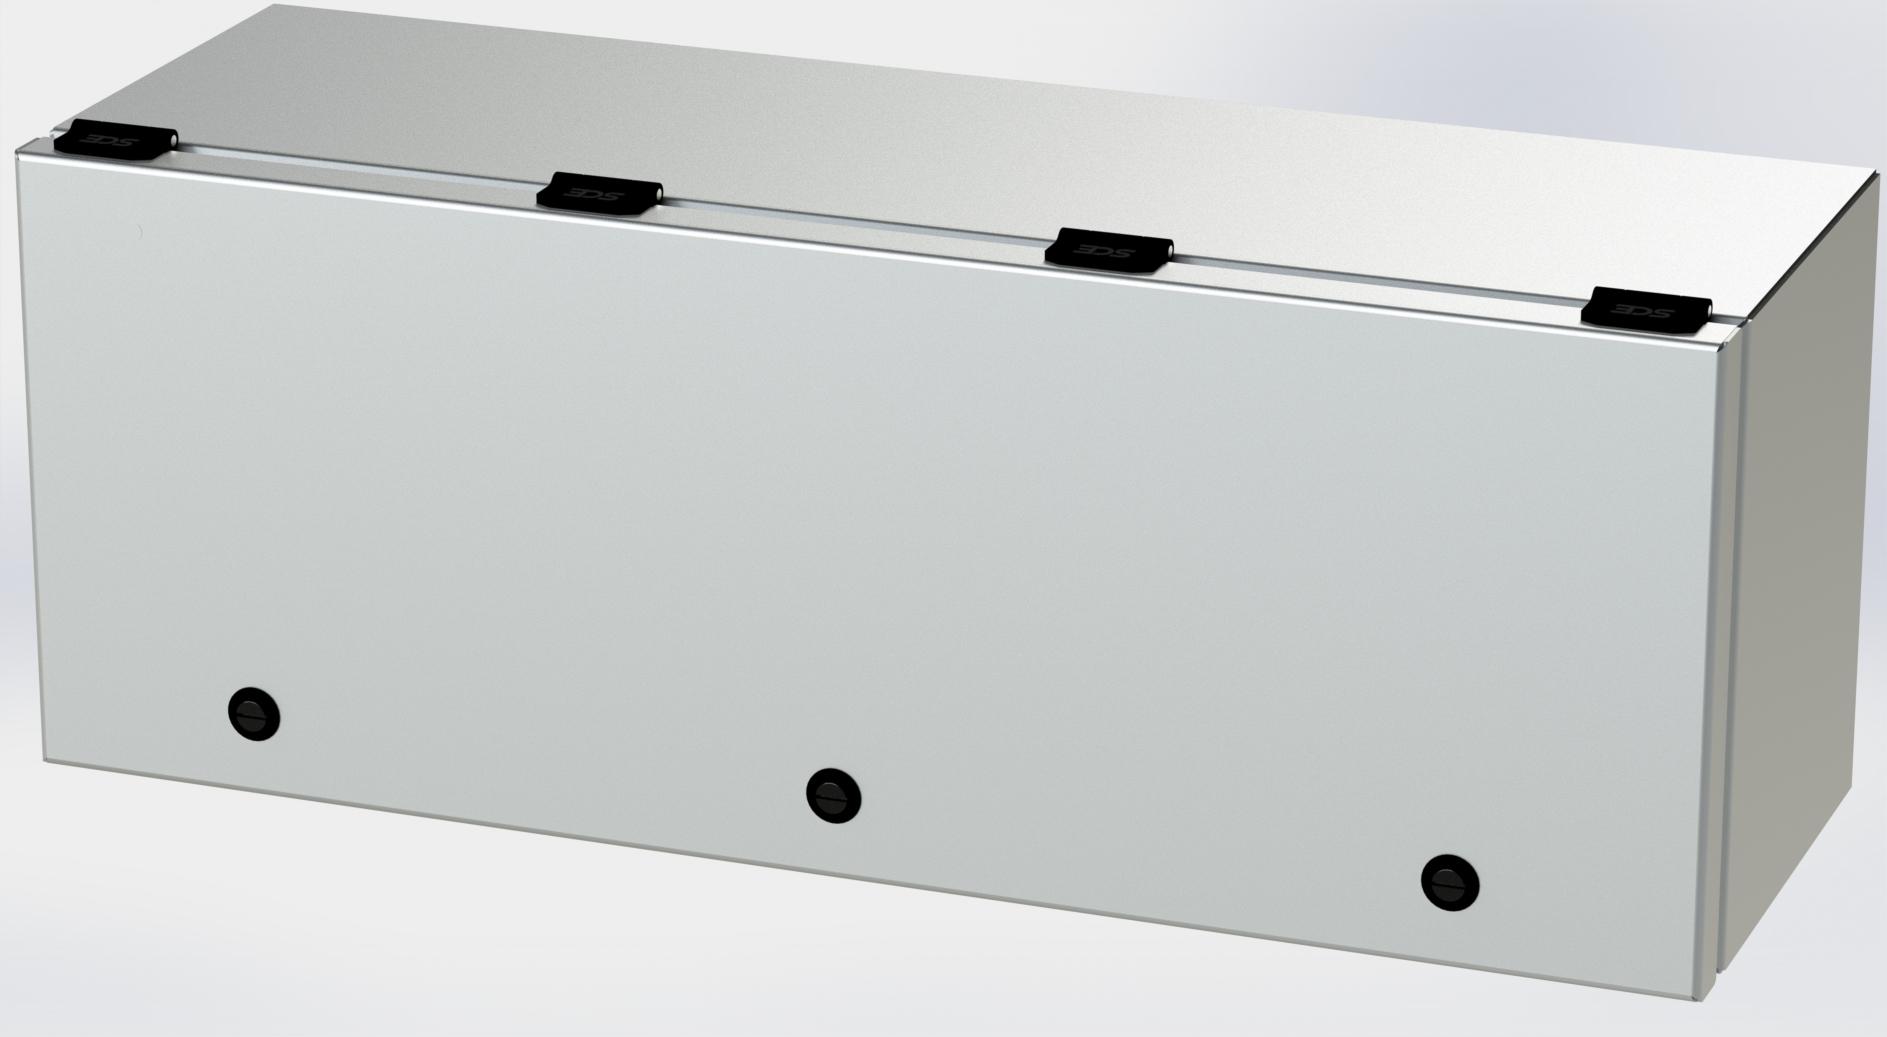 Saginaw Control SCE-L9248ELJSS S.S. ELJ Trough Enclosure, Height:9.00", Width:24.00", Depth:8.00", #4 brushed finish on all exterior surfaces. Optional sub-panels are powder coated white.